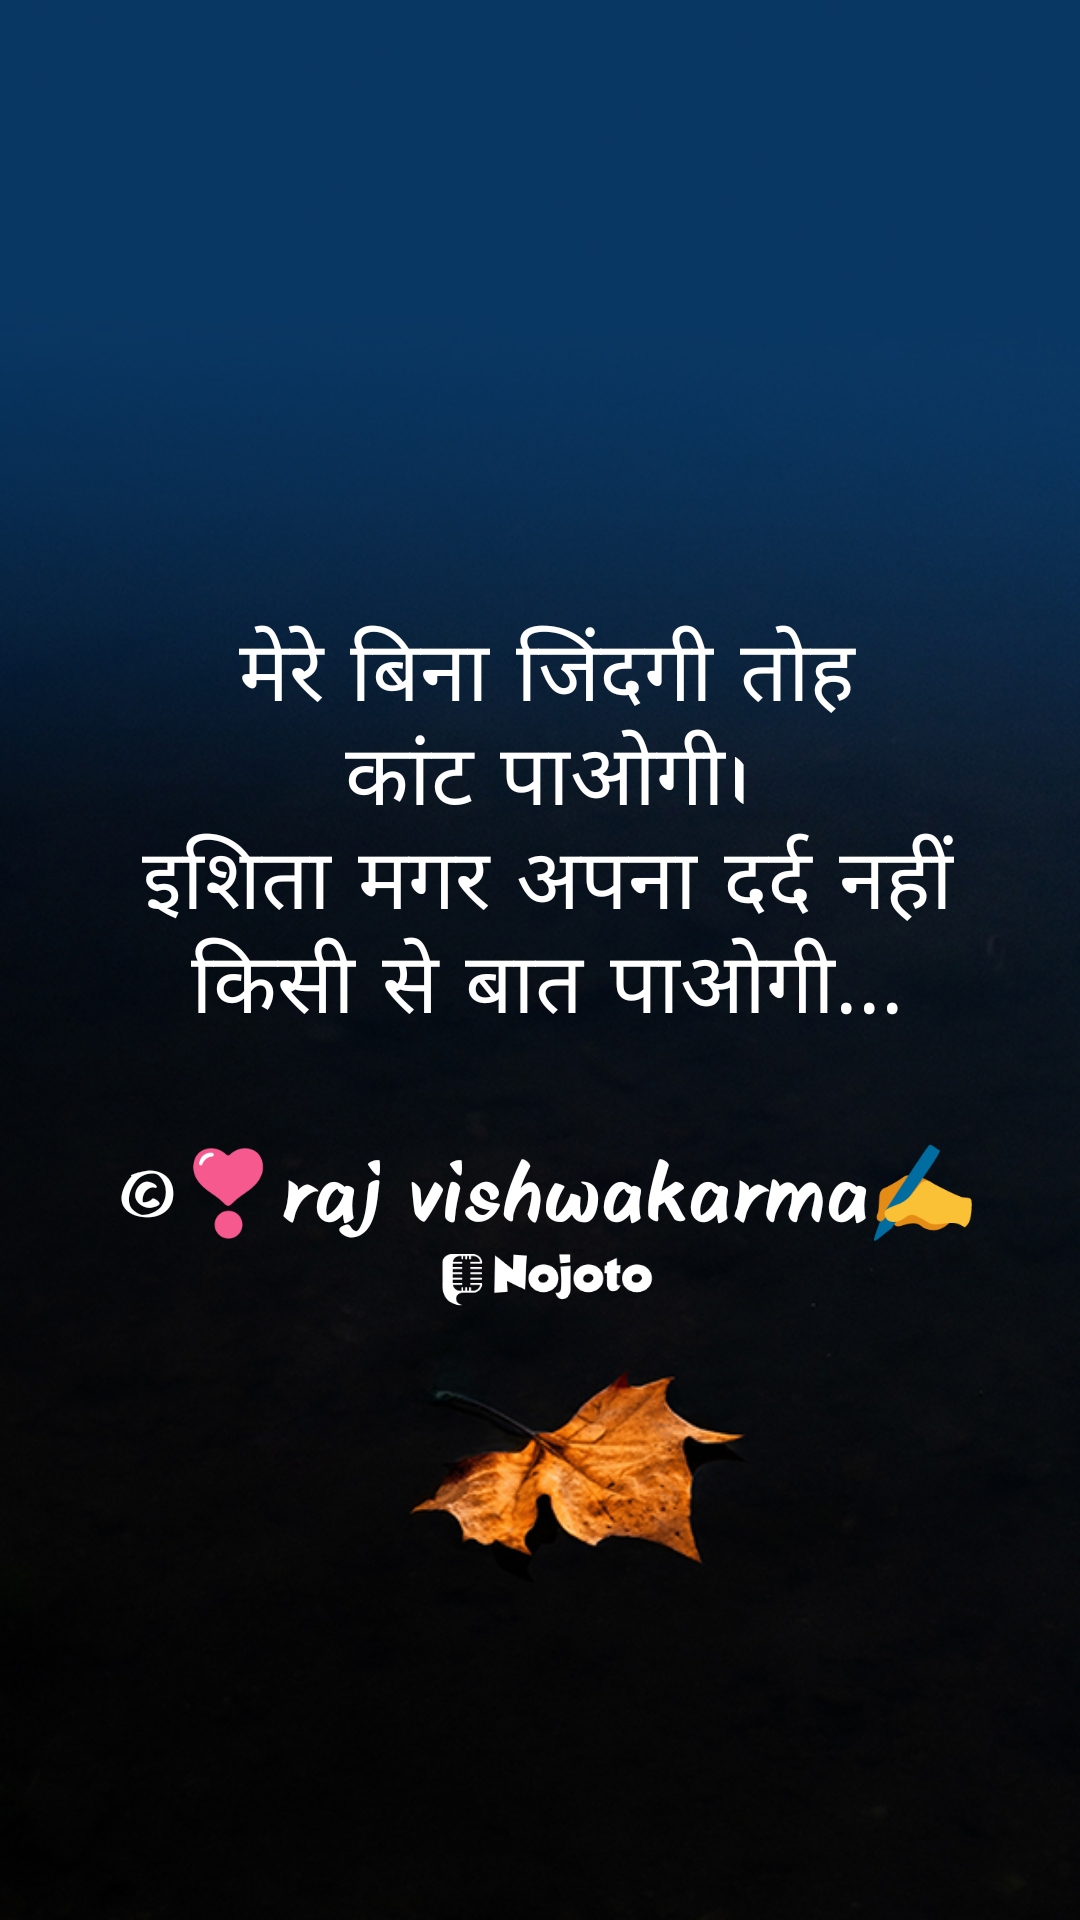 like share comment and follow for more unread shayaris